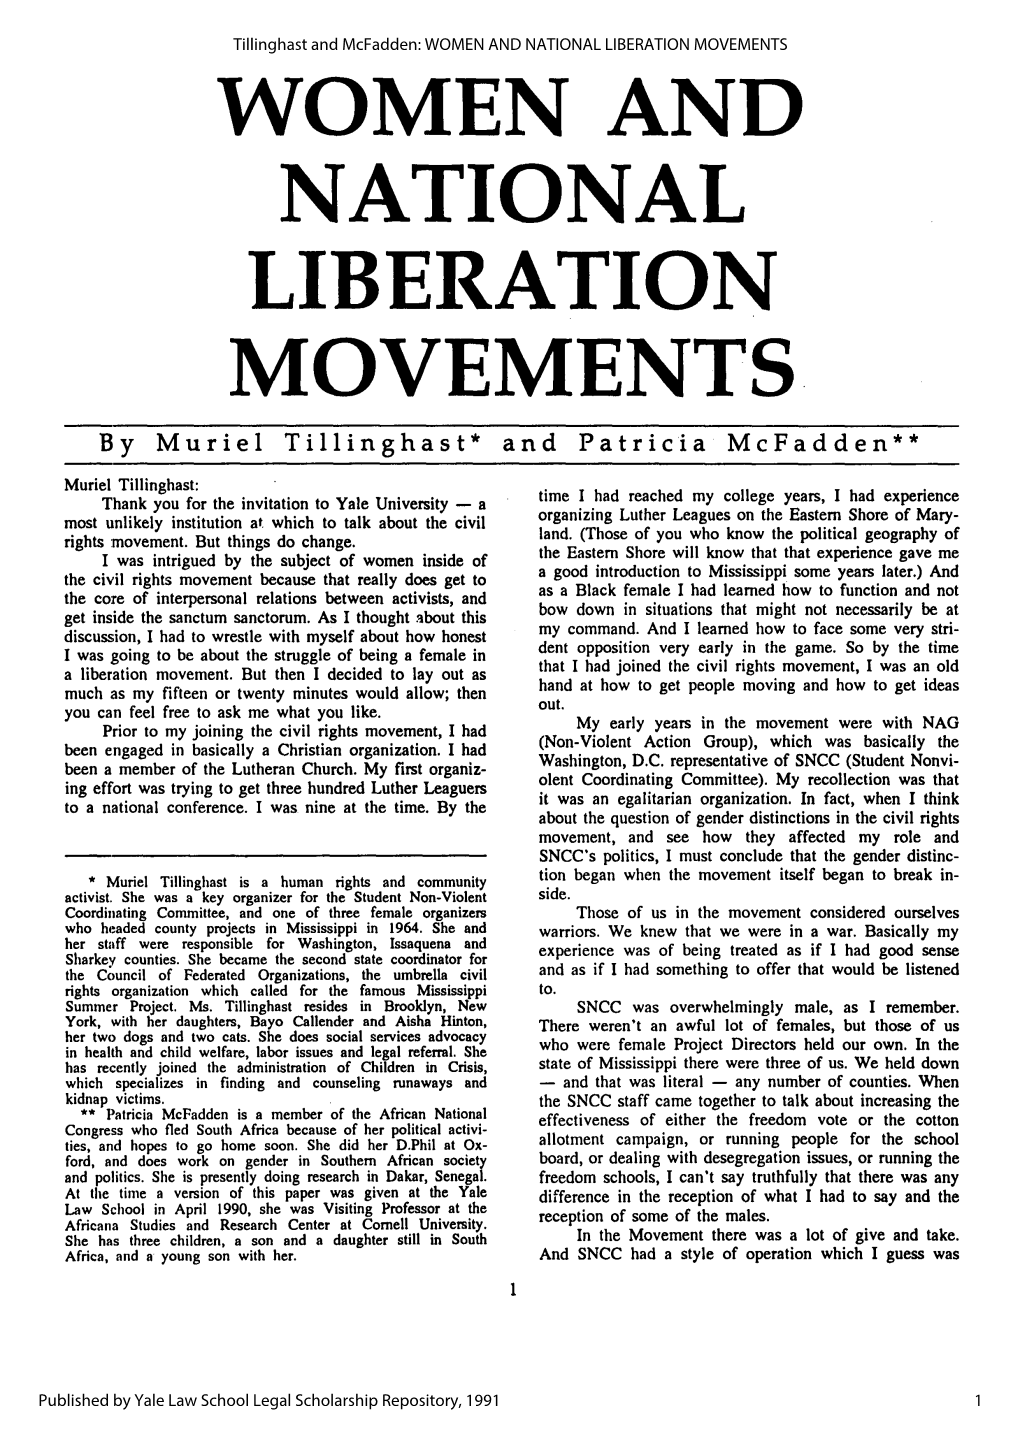 WOMEN and NATIONAL LIBERATION MOVEMENTS WOMEN and NATIONAL LIBERATION MOVEMENTS by Muriel Tillinghast* and Patricia Mcfadden**